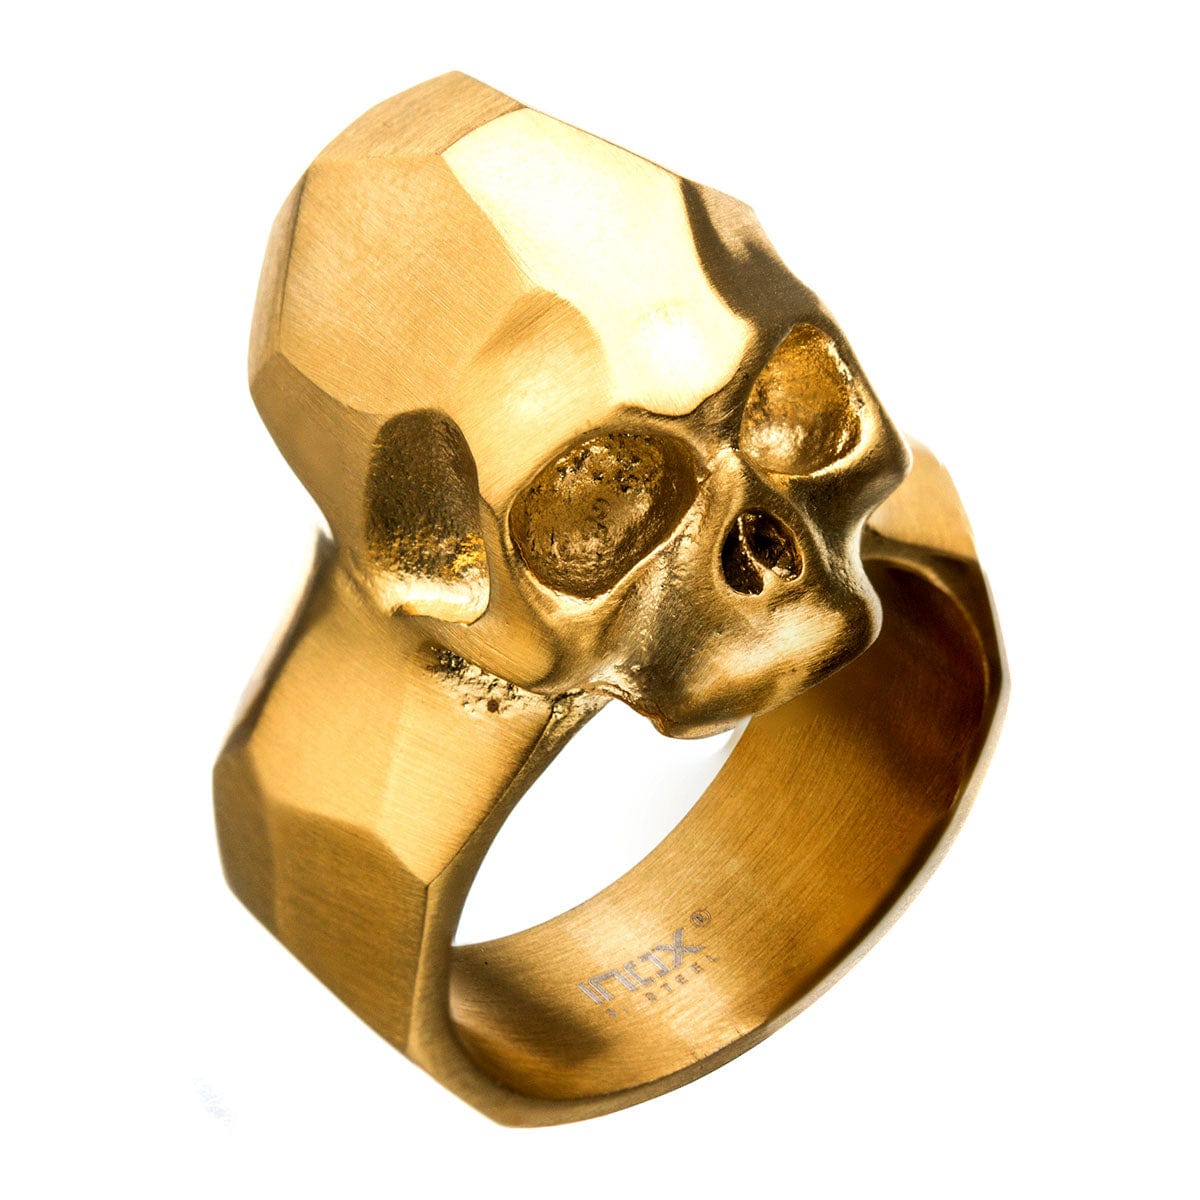 INOX JEWELRY Rings Golden Tone Stainless Steel Brushed Finish Rugged Skull Ring